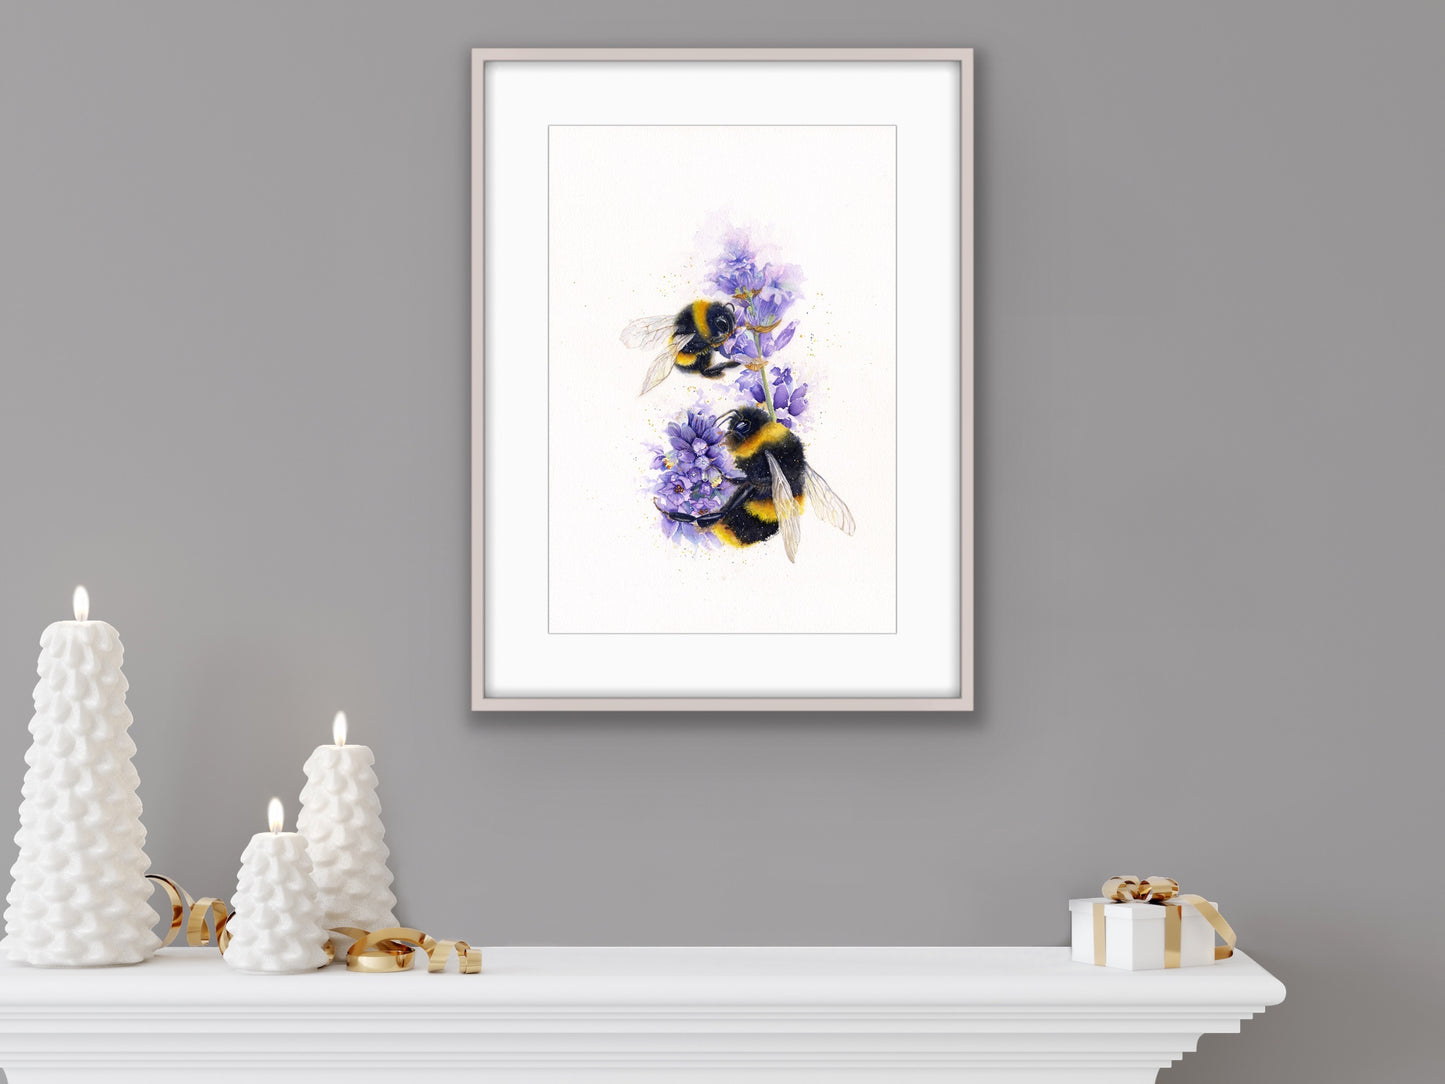 Bees on Lavender - SOLD